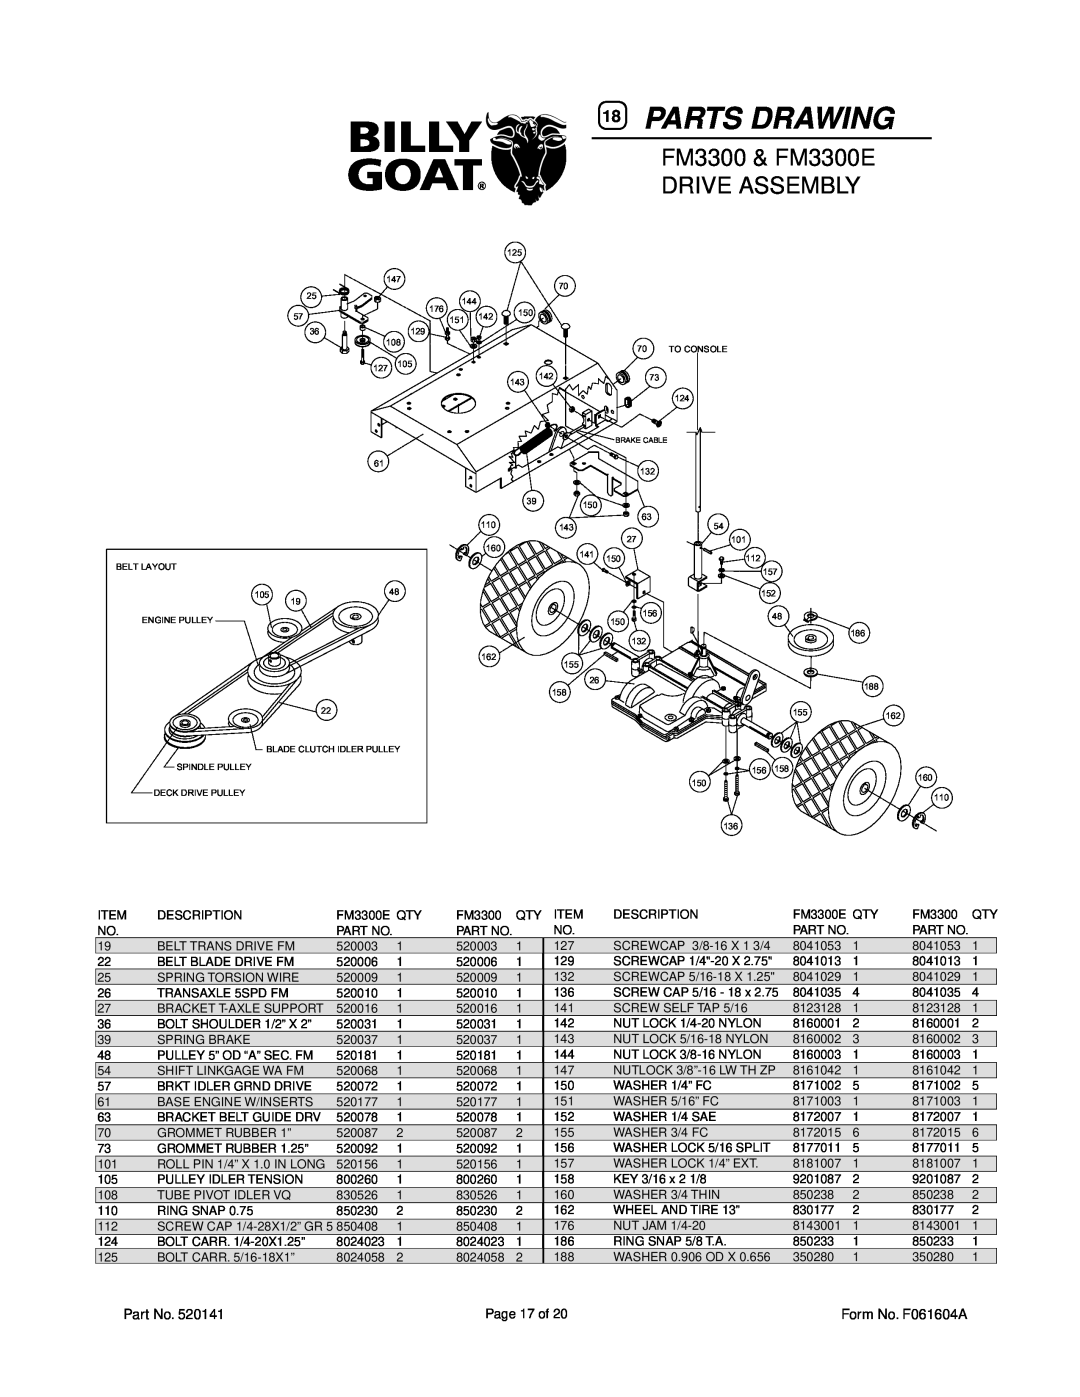 Billy Goat owner manual Drive Assembly, Parts Drawing, FM3300 & FM3300E 